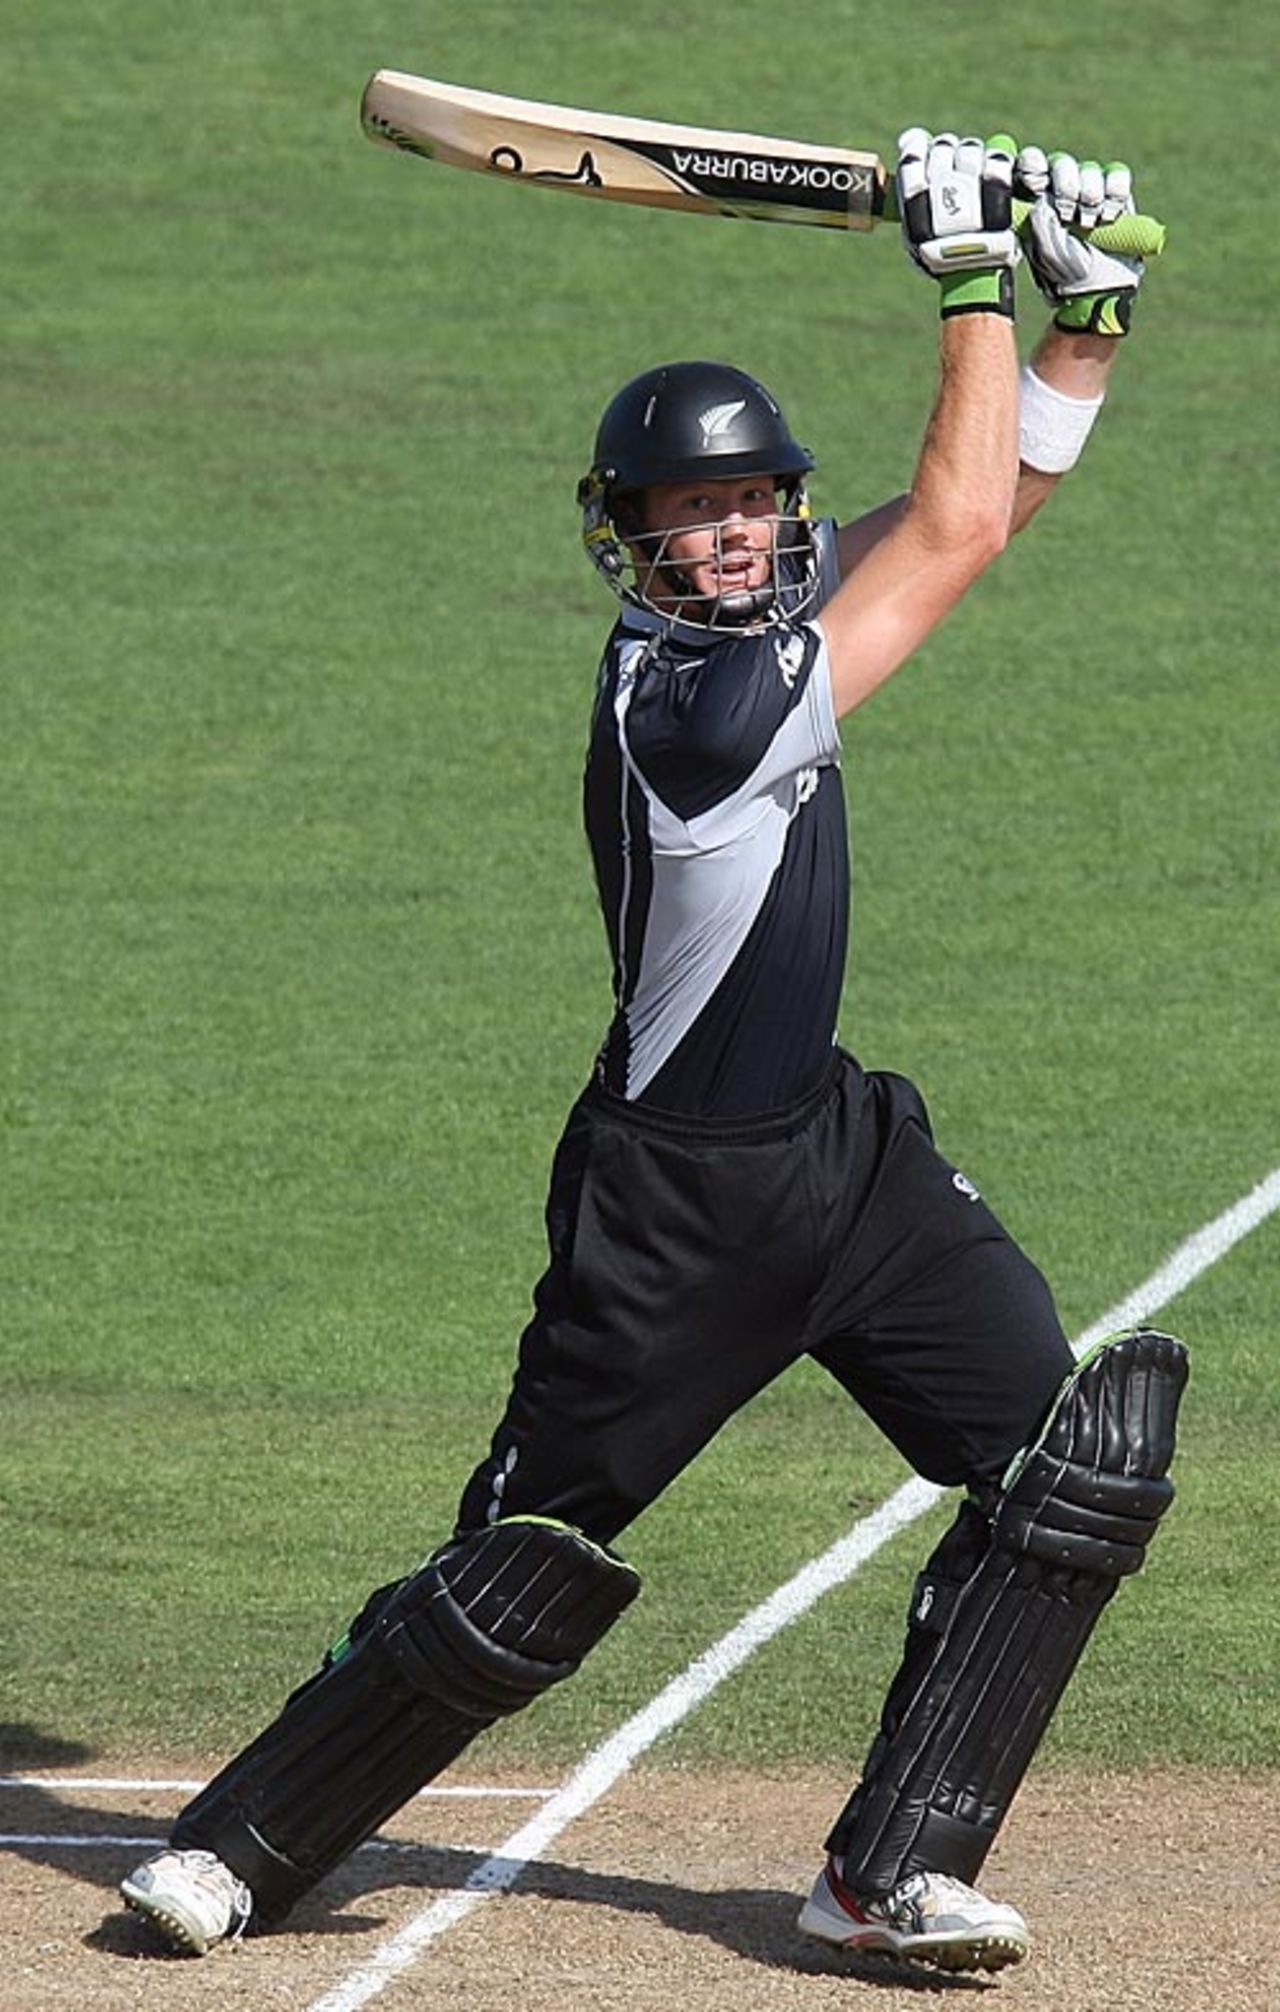 Martin Guptill switches gears, New Zealand v West Indies, 5th ODI, Napier, January 13, 2009